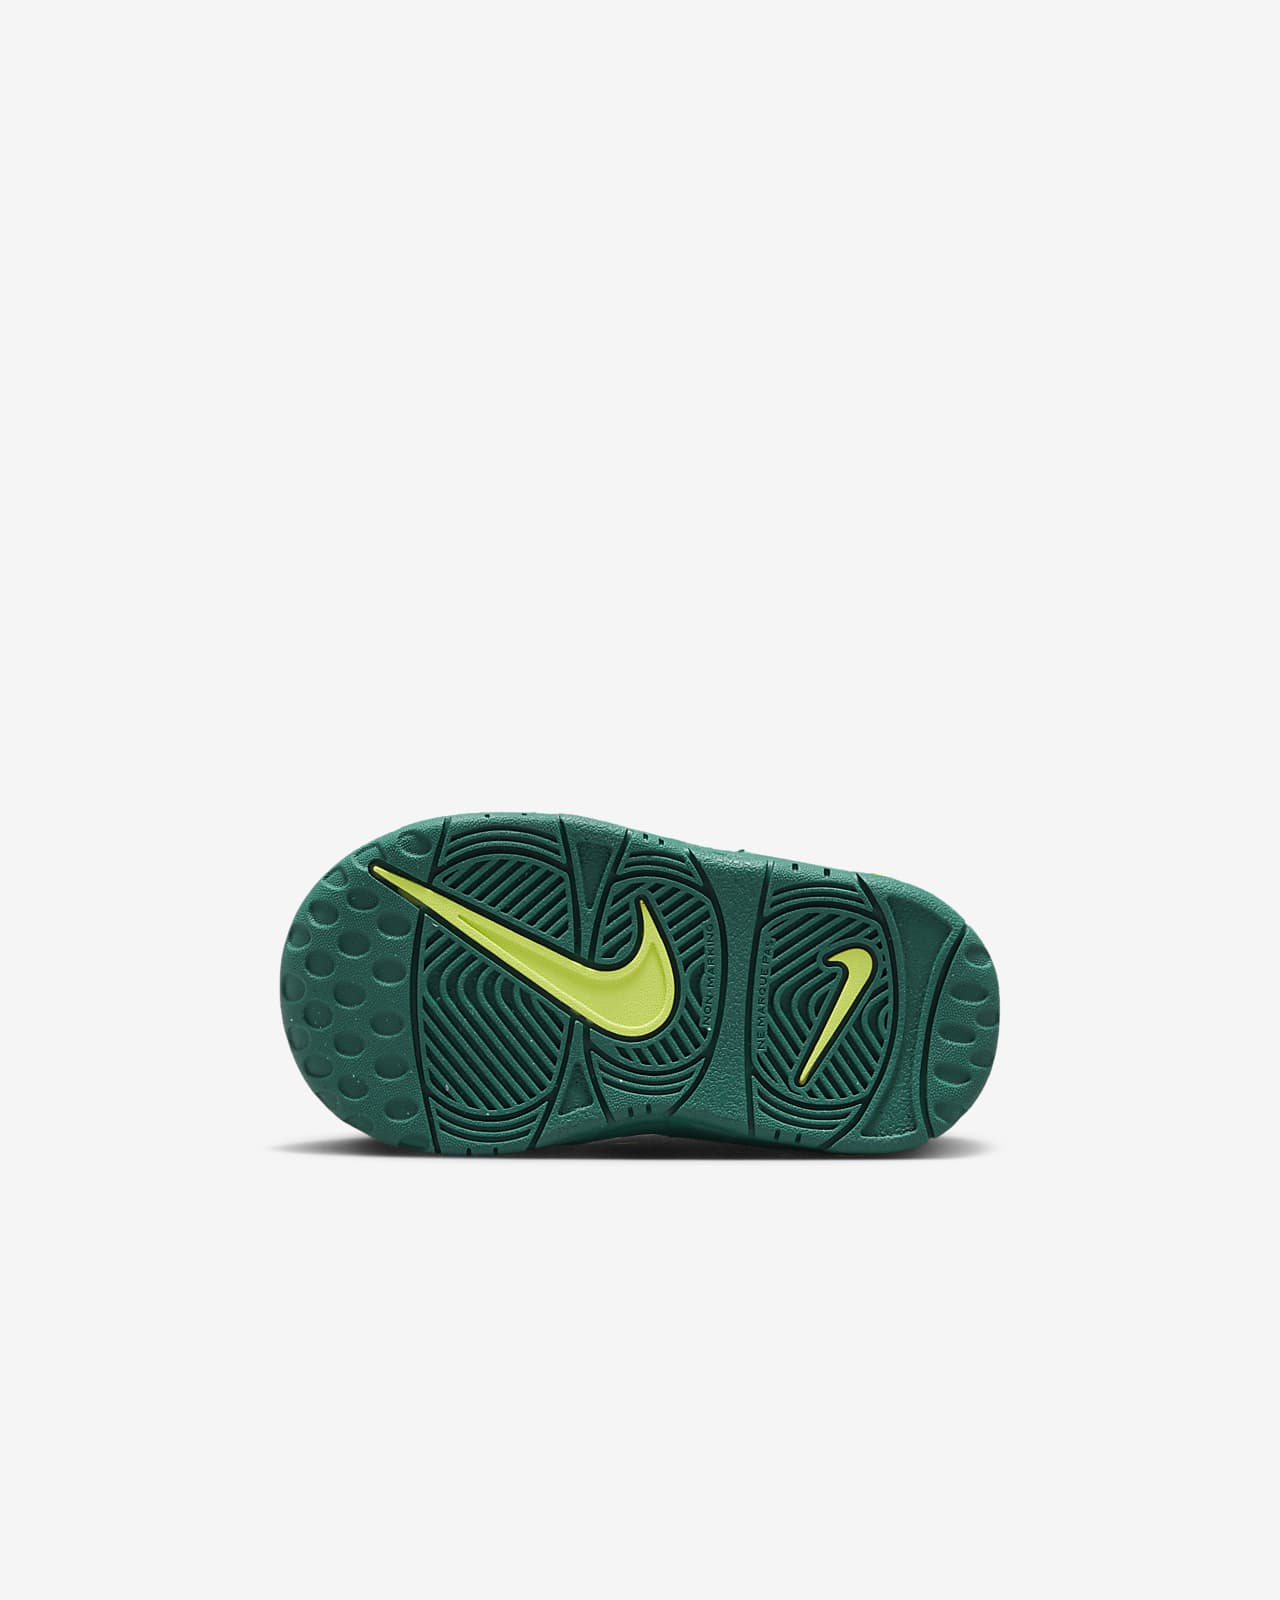 Nike Air More Uptempo Baby/Toddler Shoes